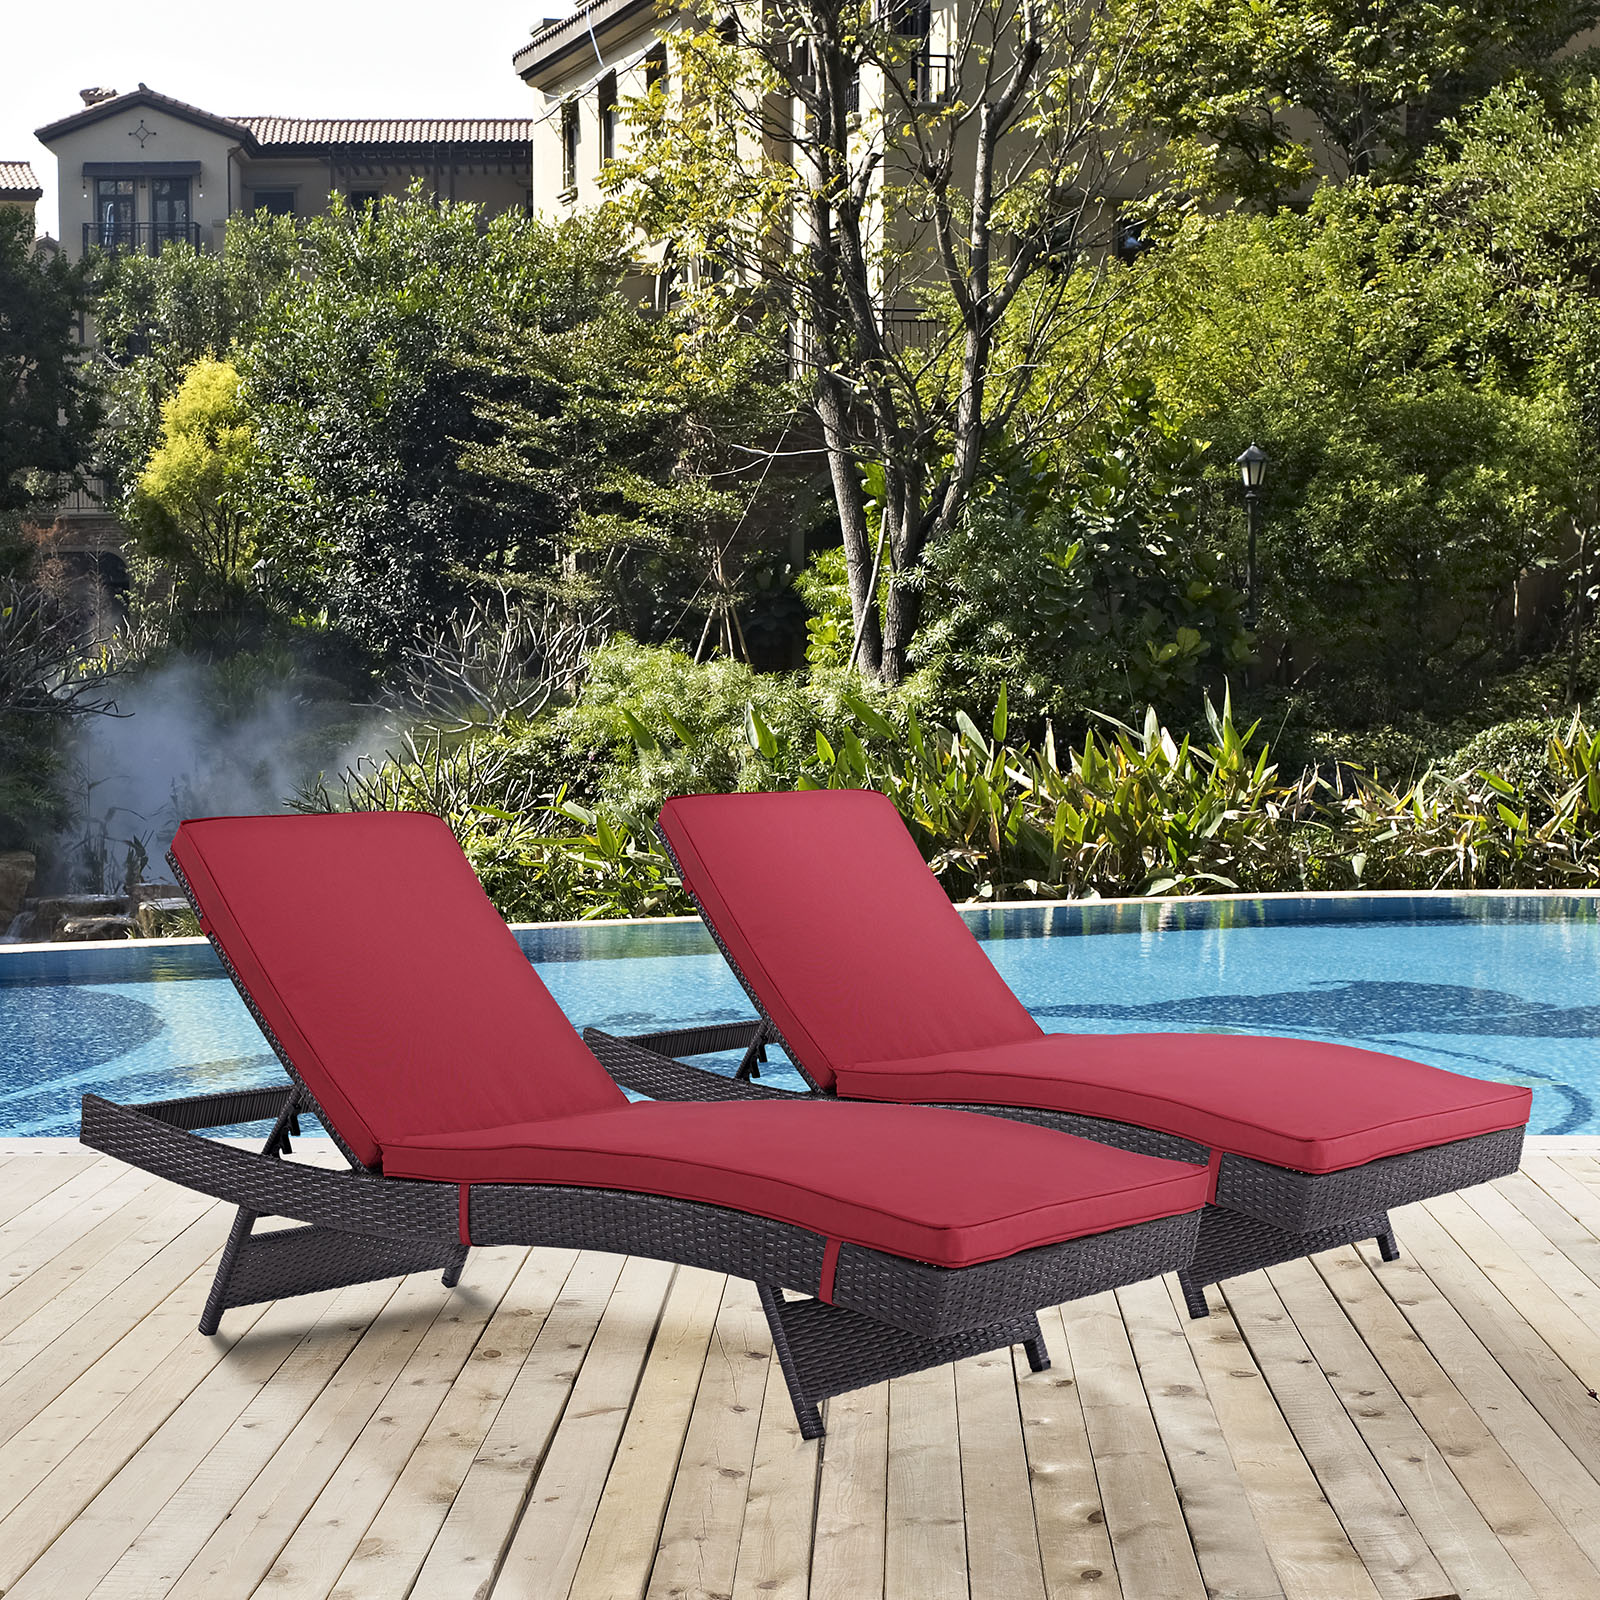 Modway Convene Chaise Outdoor Patio Set of 2 in Espresso Red - image 1 of 4